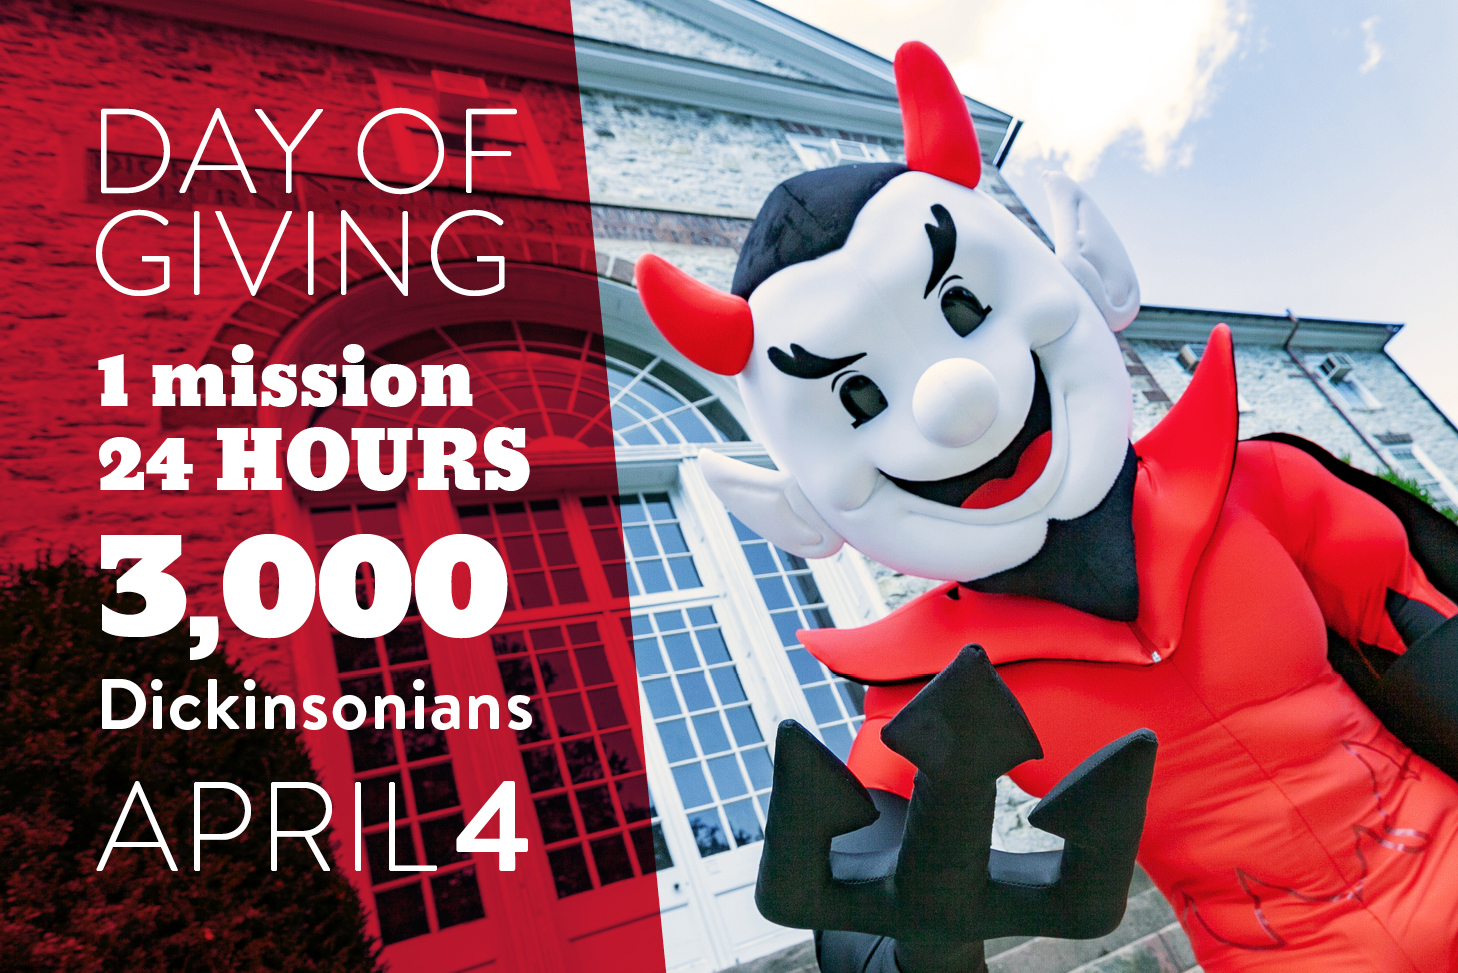 Dickinson to Hold Day of Giving, Tuesday, April 4